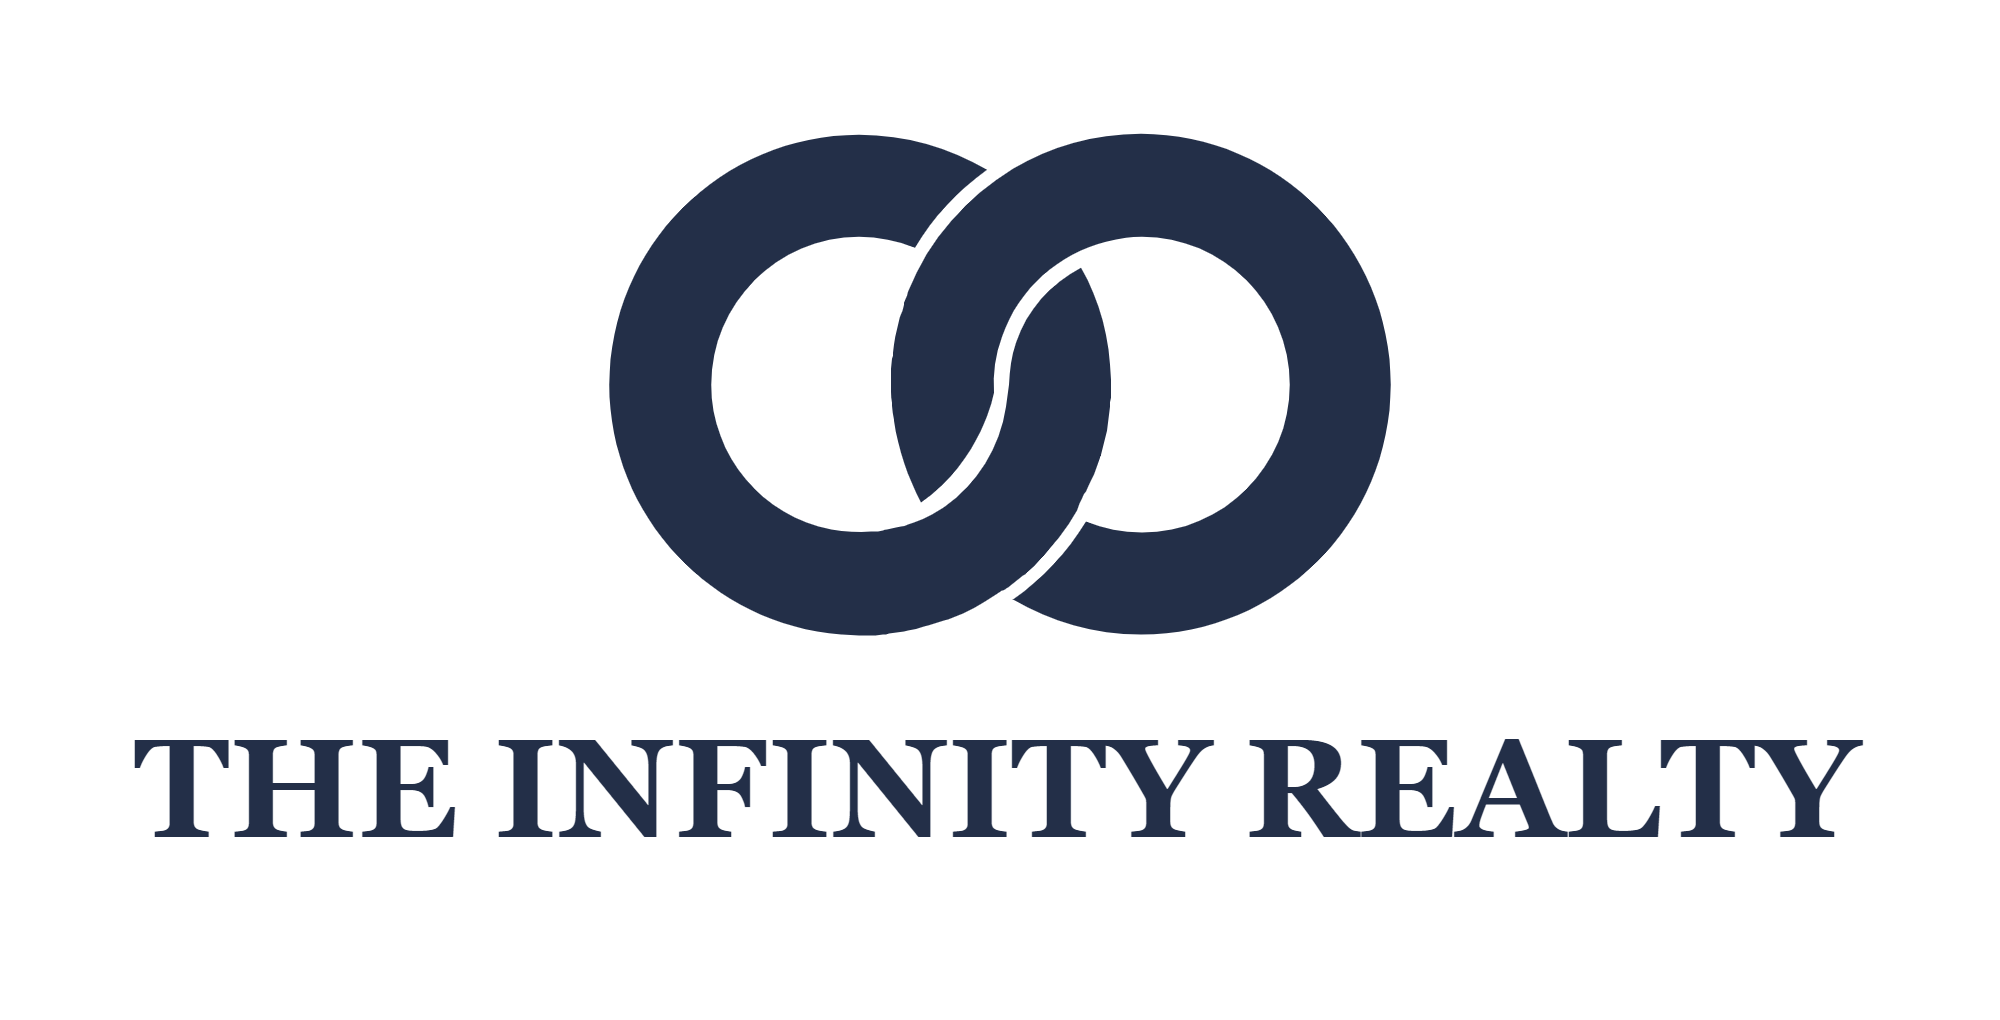 The Infinity Realty